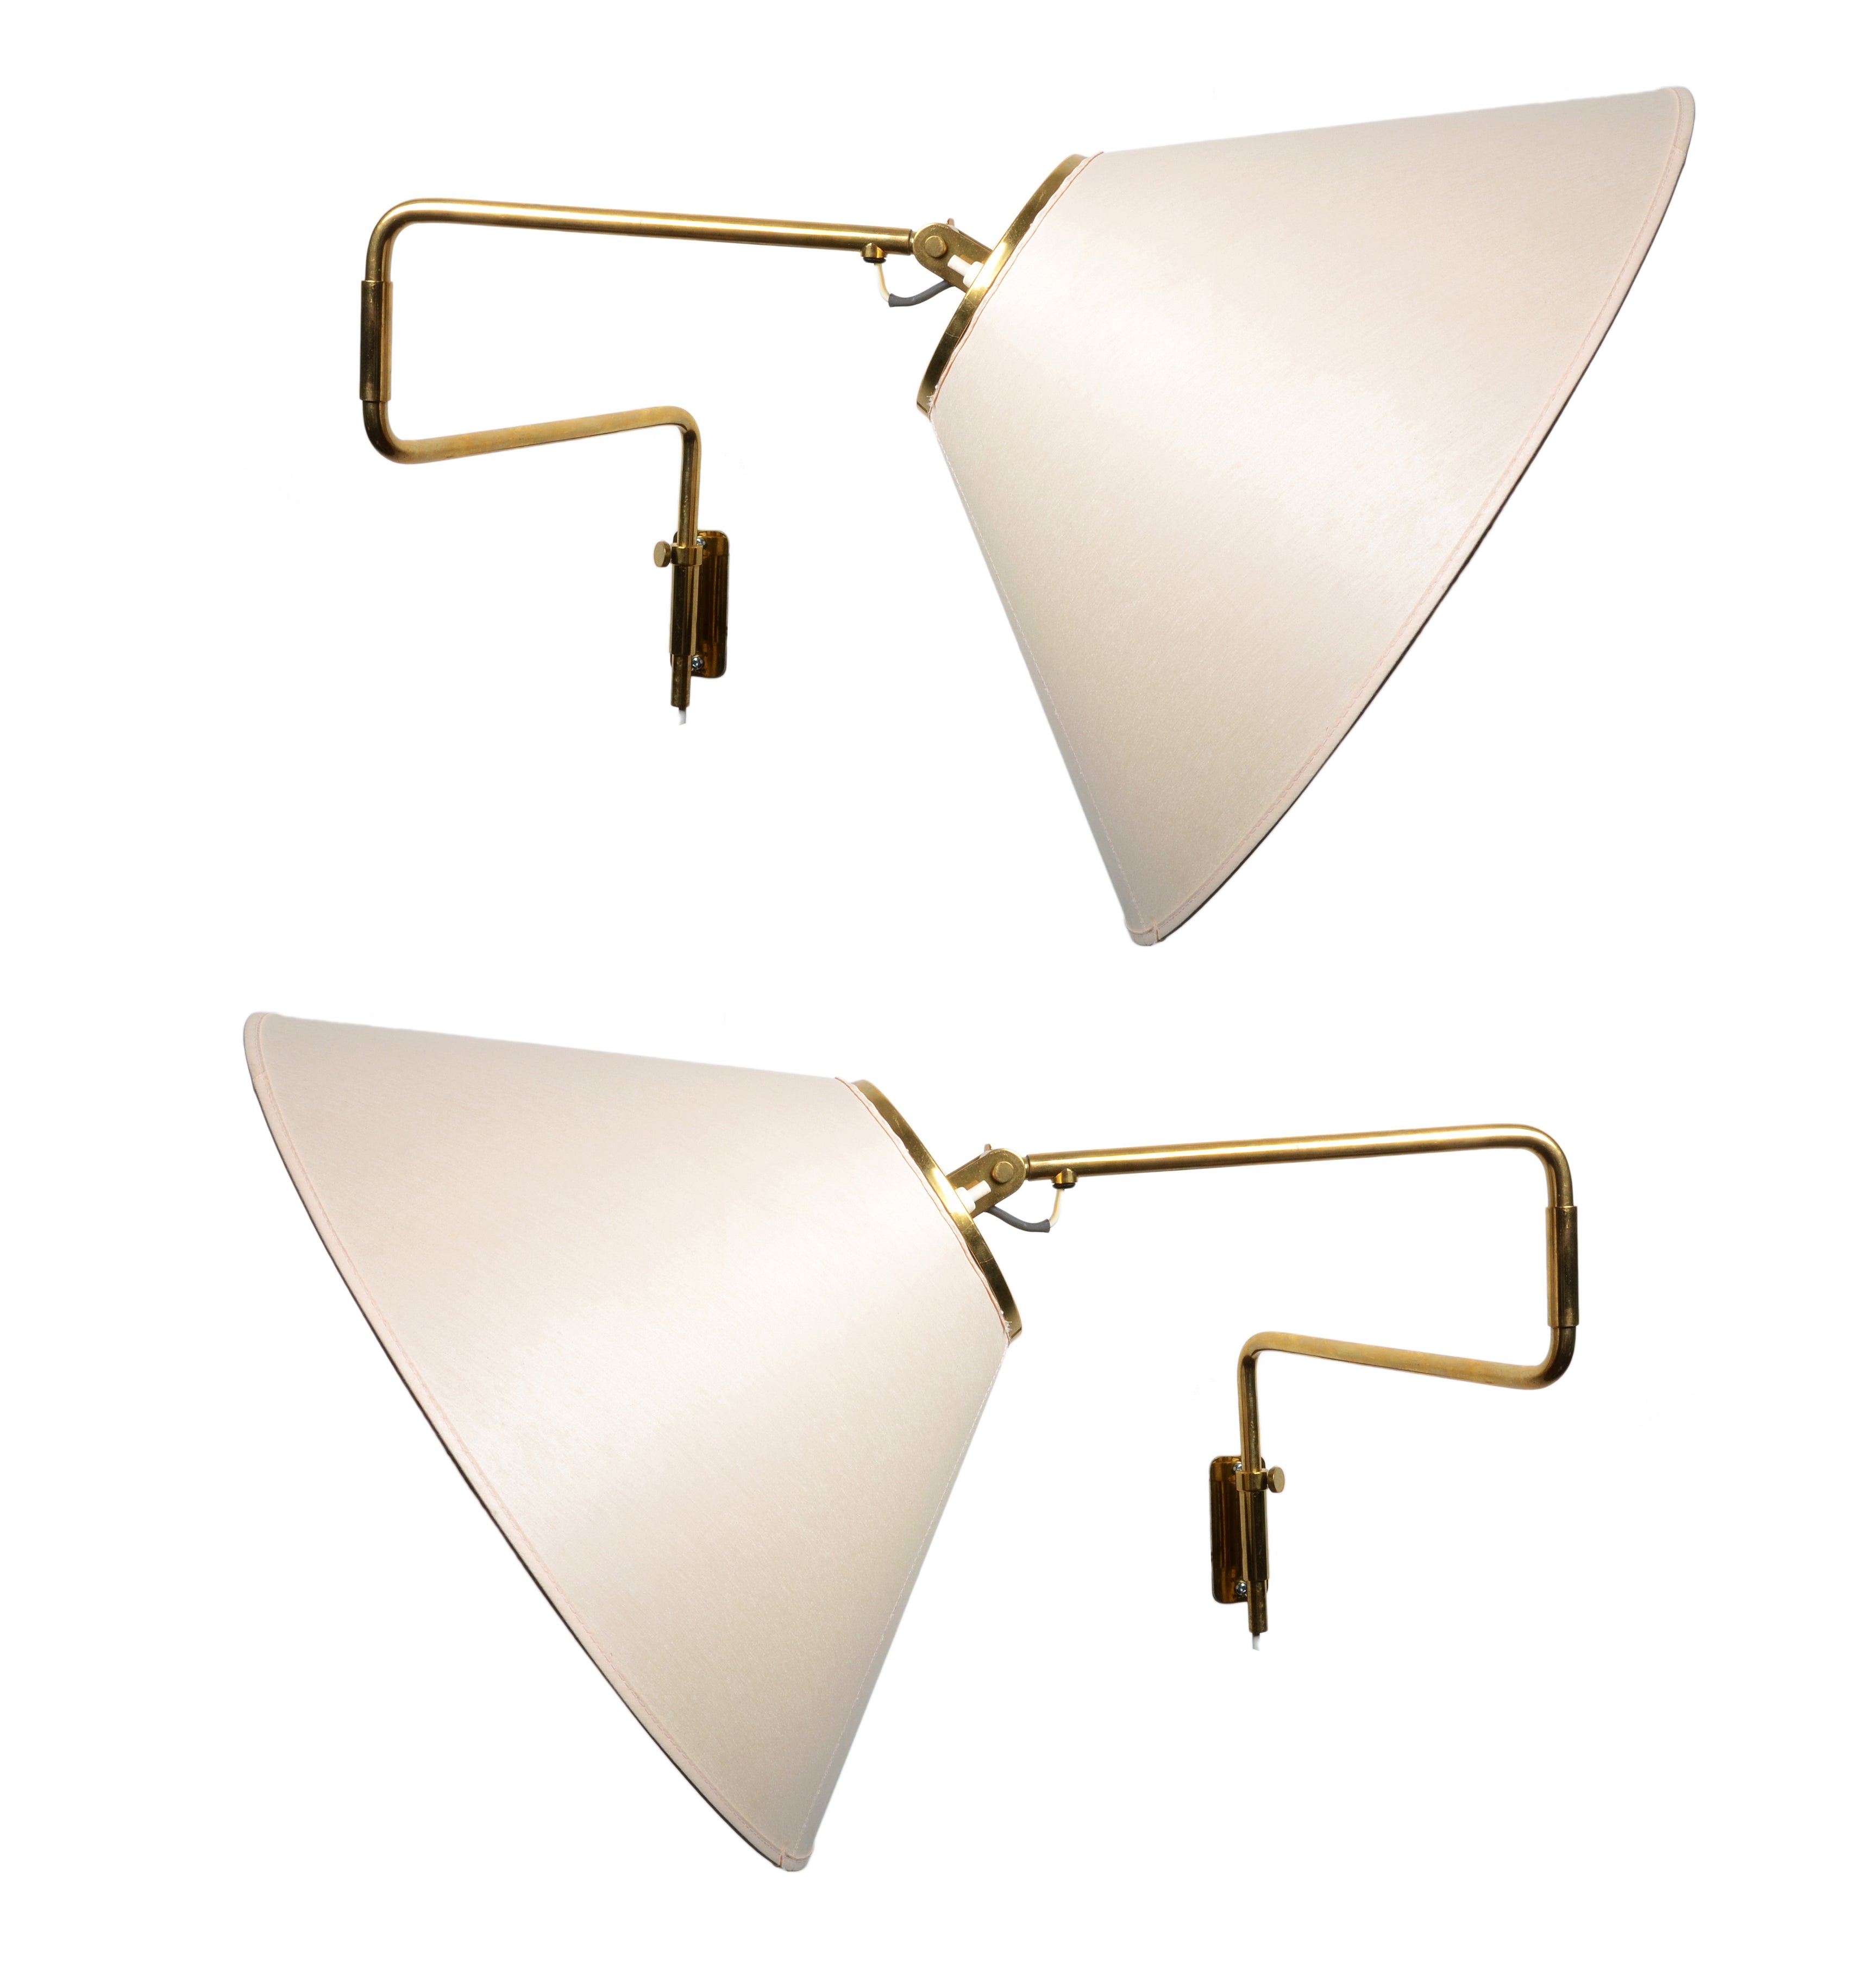 Pair of Paavo Tynell Articulated Wall Lamps